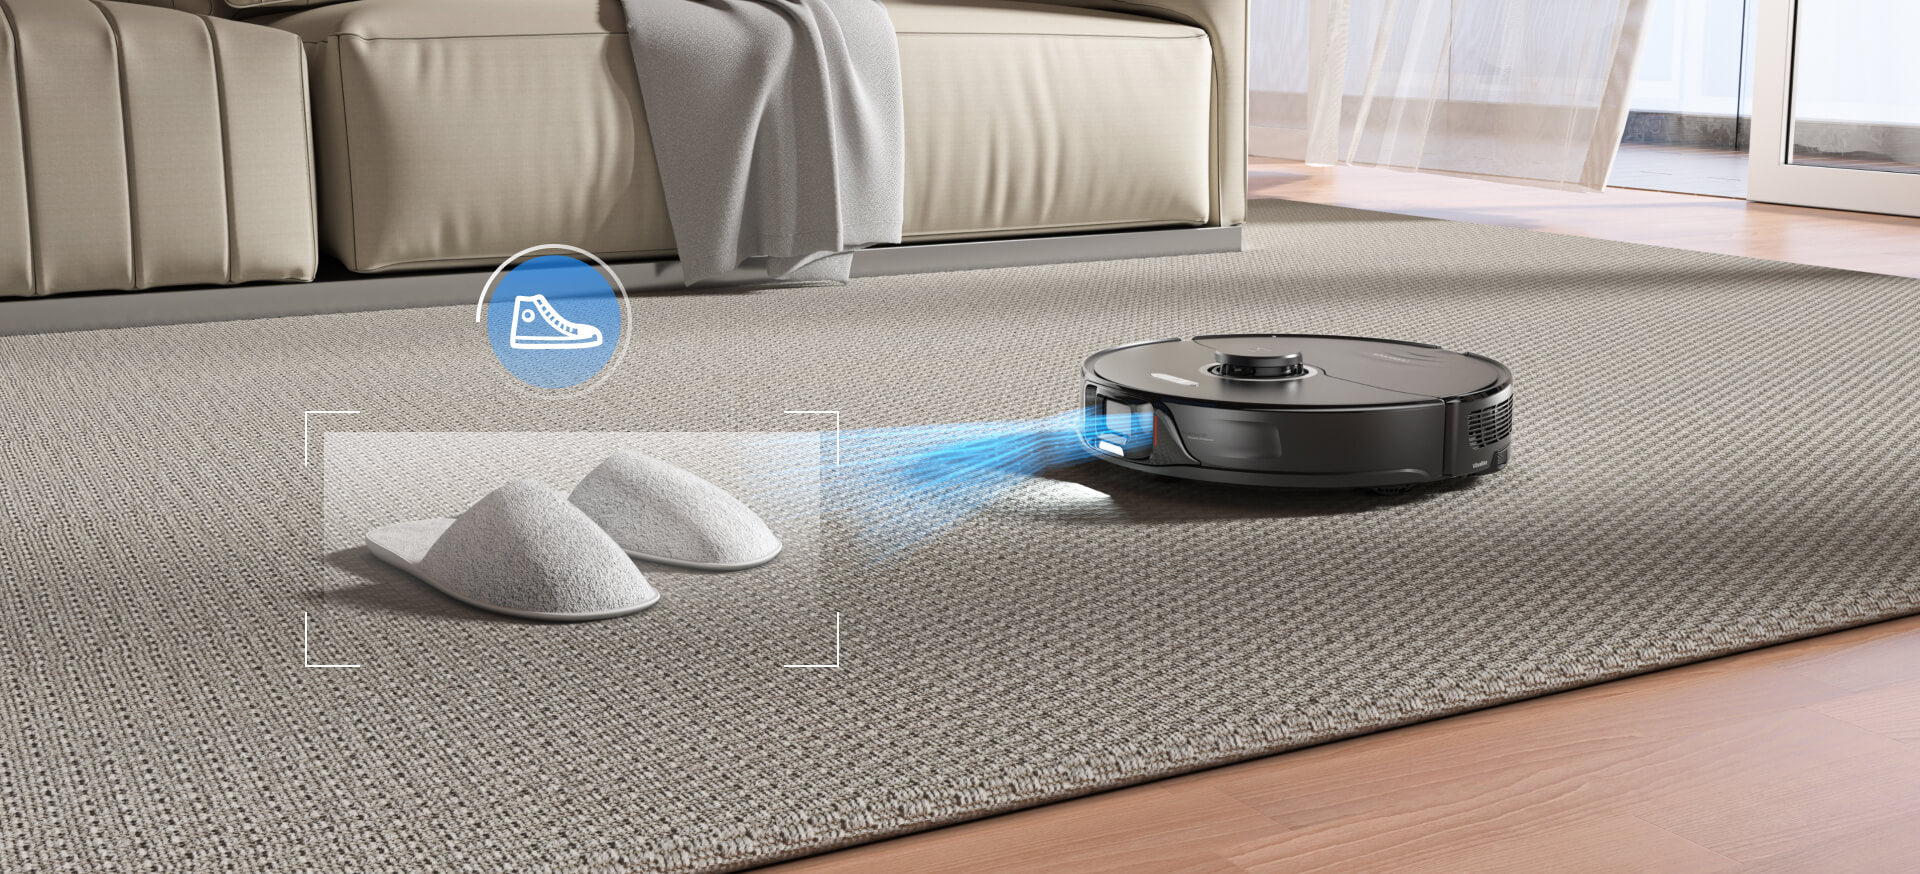 Roborock® S8 Robot Vacuum Cleaner and Sonic Mopping with DuoRoller™ Brush,  6000 Pa, and Obstacle Avoidance 